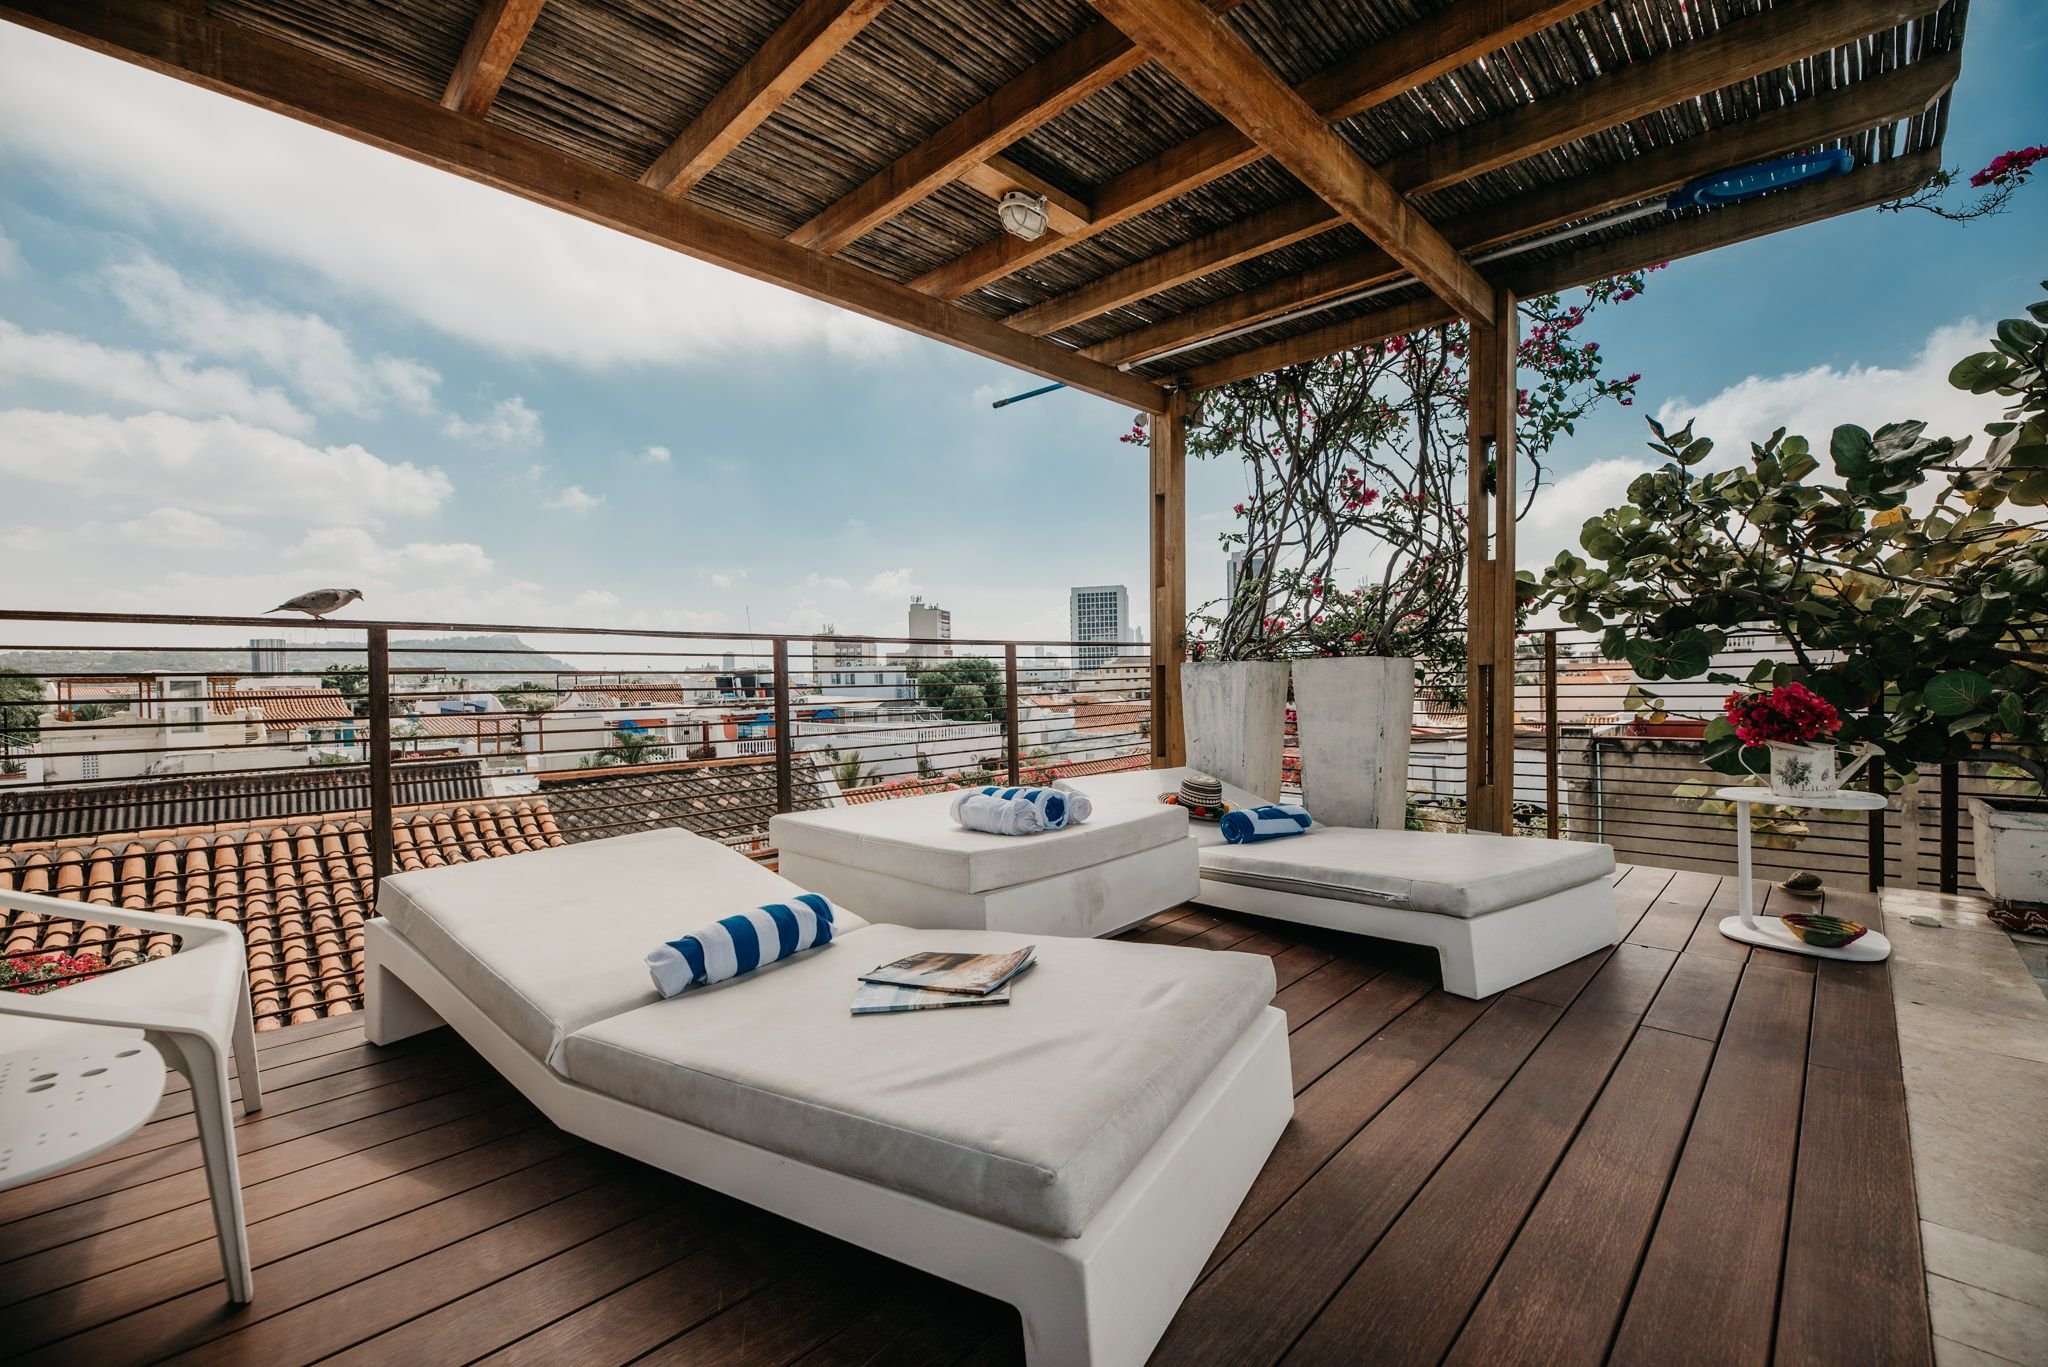 Property Image 2 - Luxury colonial villa in the heart of Cartagena